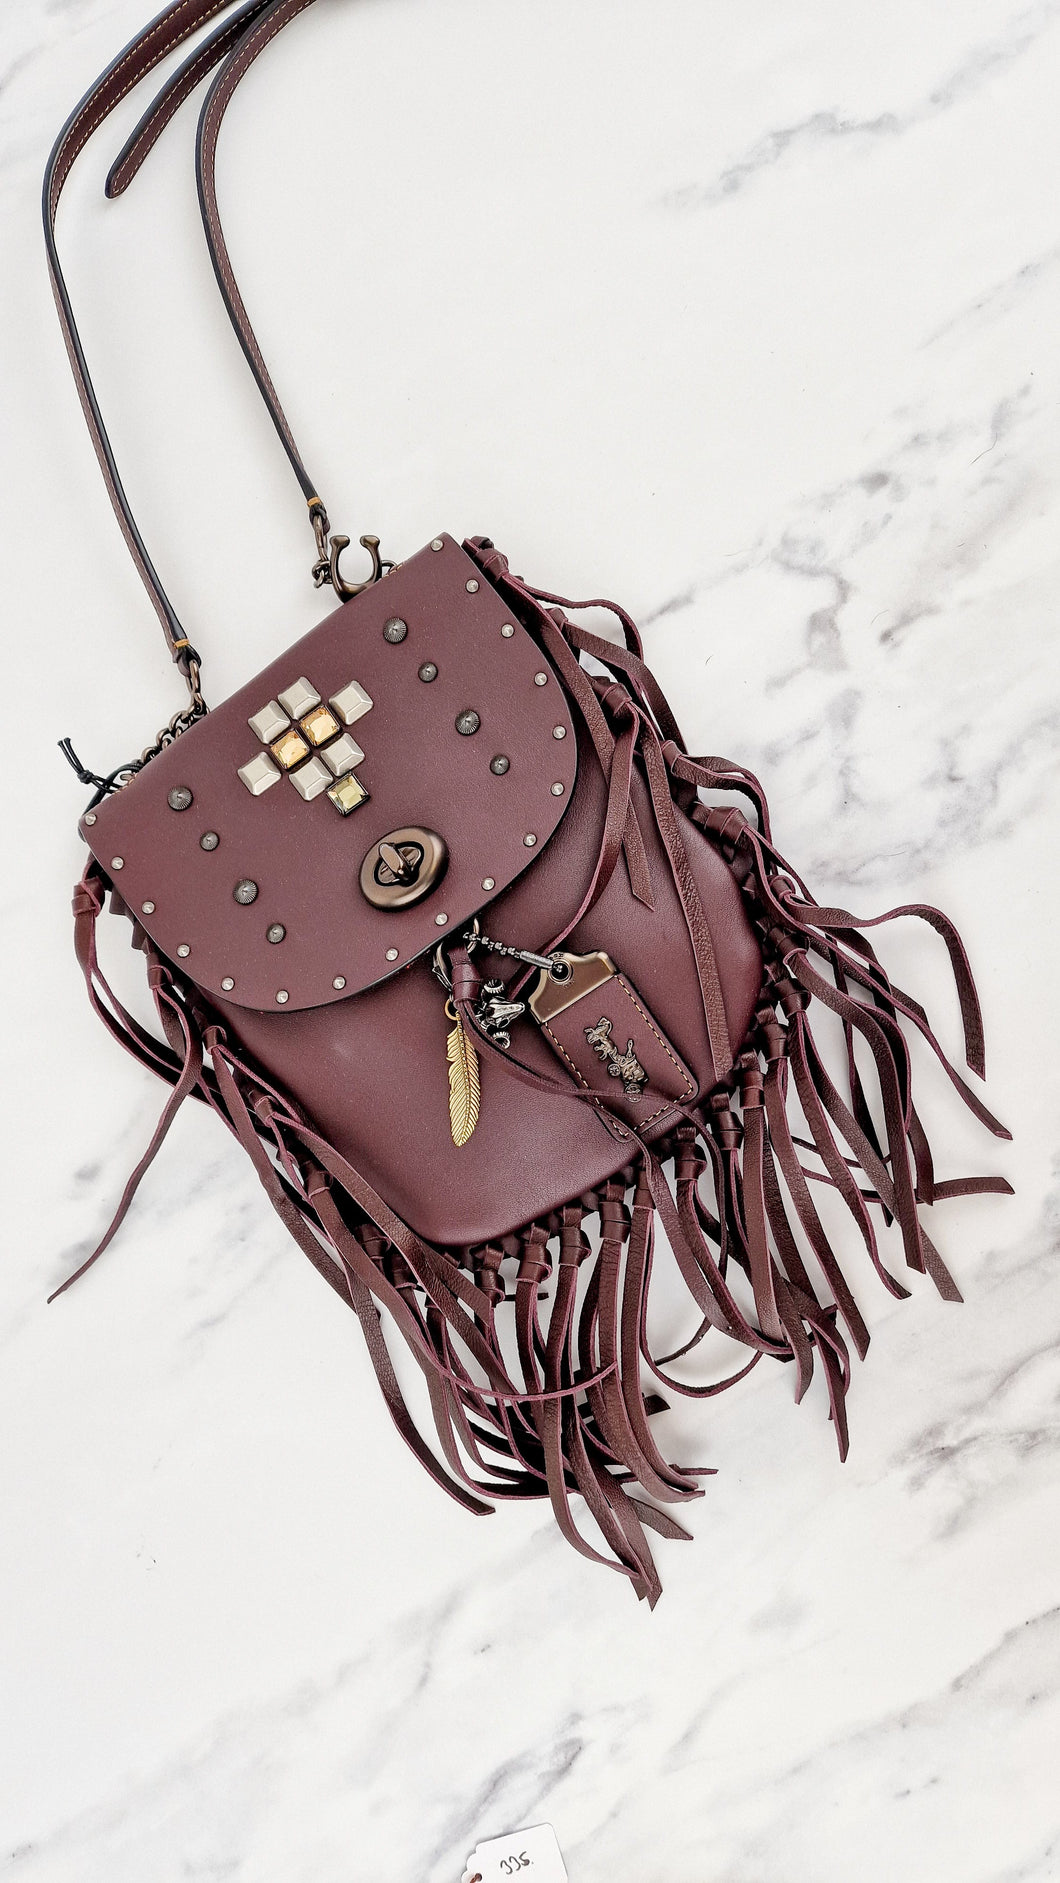 Coach 1941 Fringe Saddle Bag Pyramid Rivets in Oxblood Smooth Leather & Ram Charm - Coach 48617